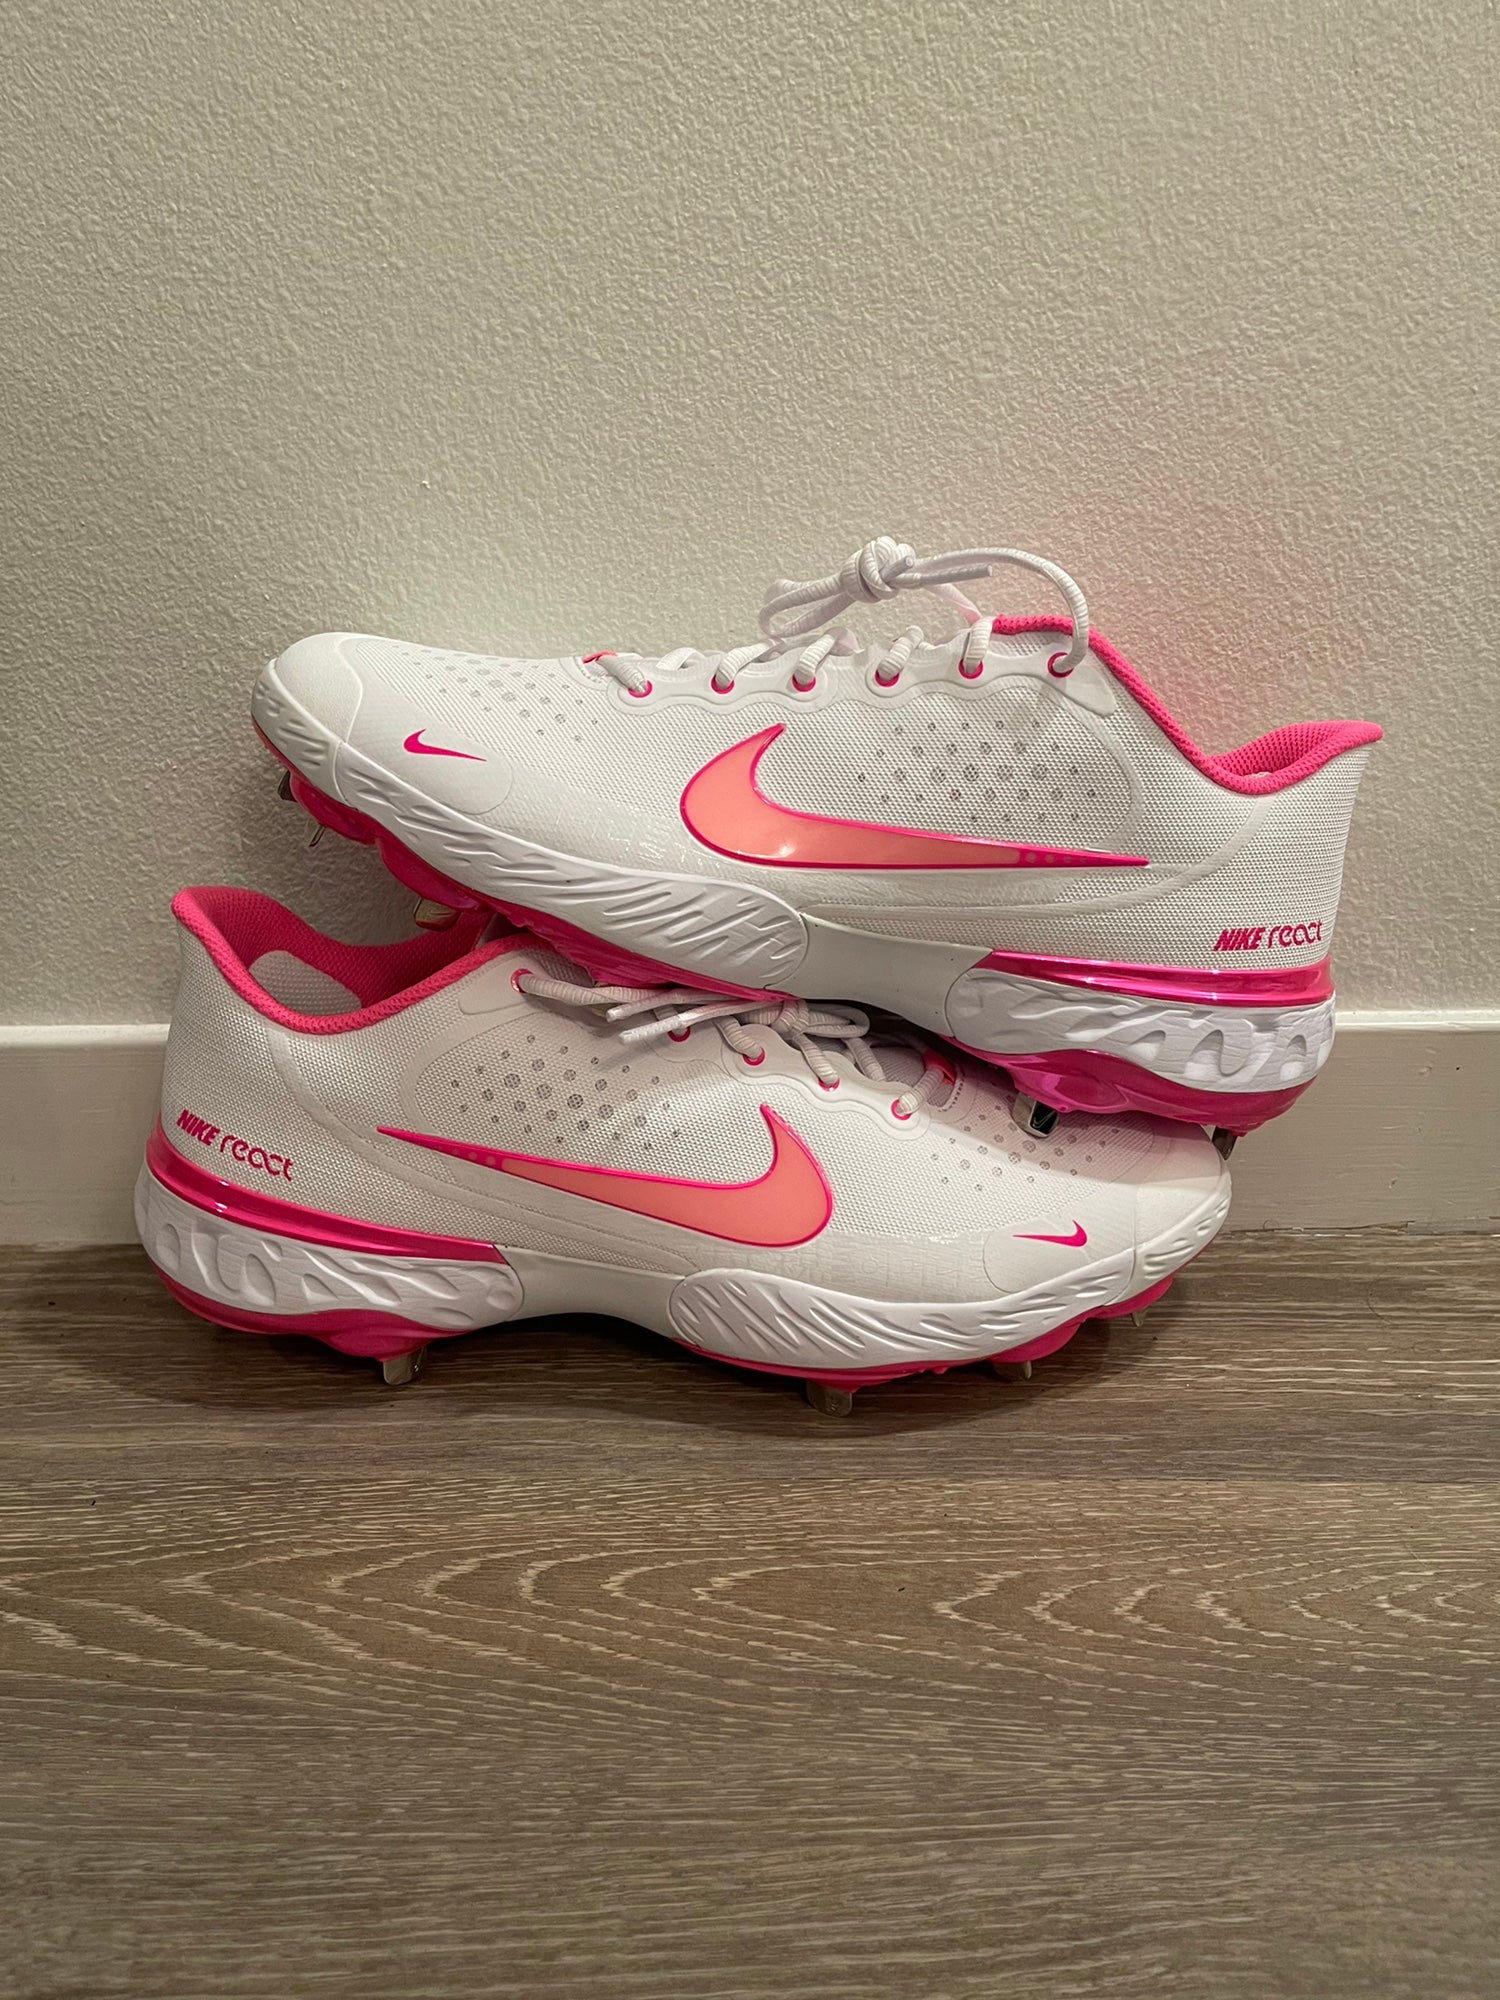 mothers day baseball cleats